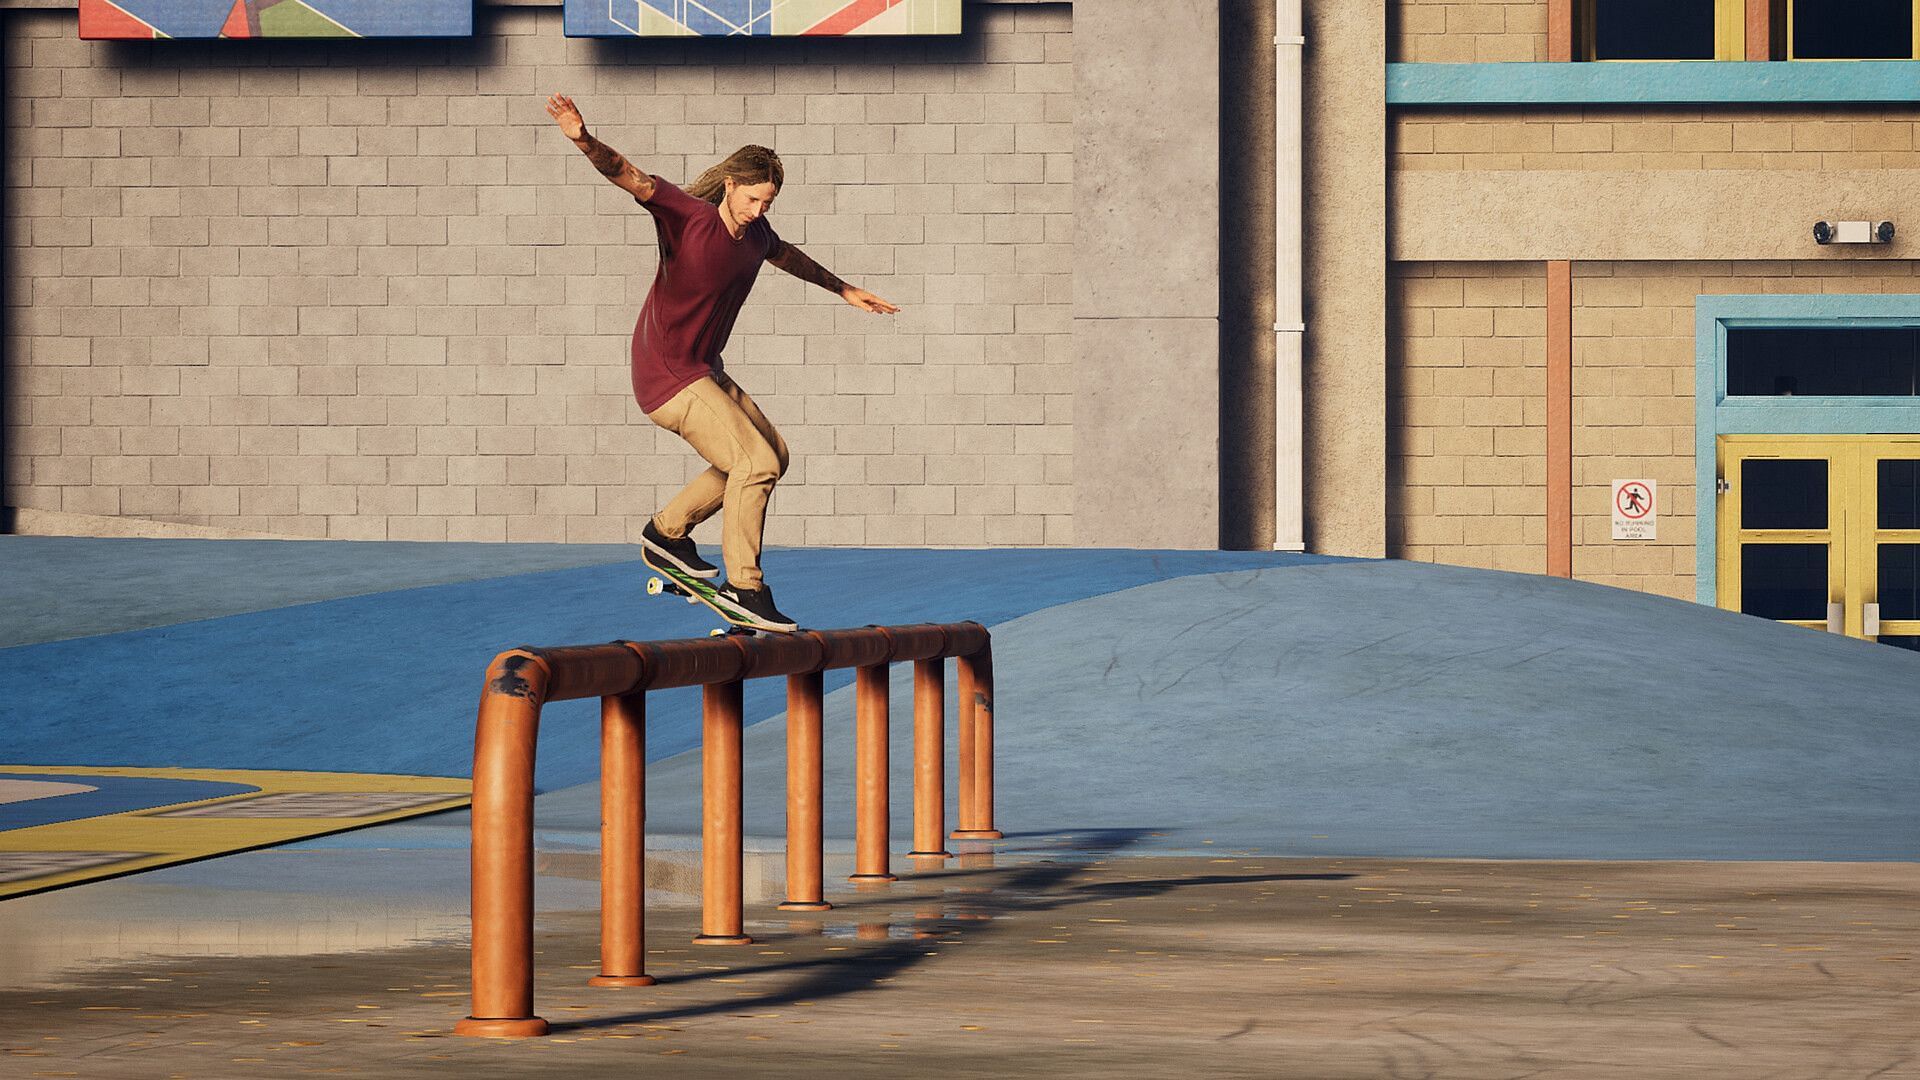 The Tony Hawk&#039;s Pro Skater 1+2 remakes are the best way to experience the skating series (Image via Activision)